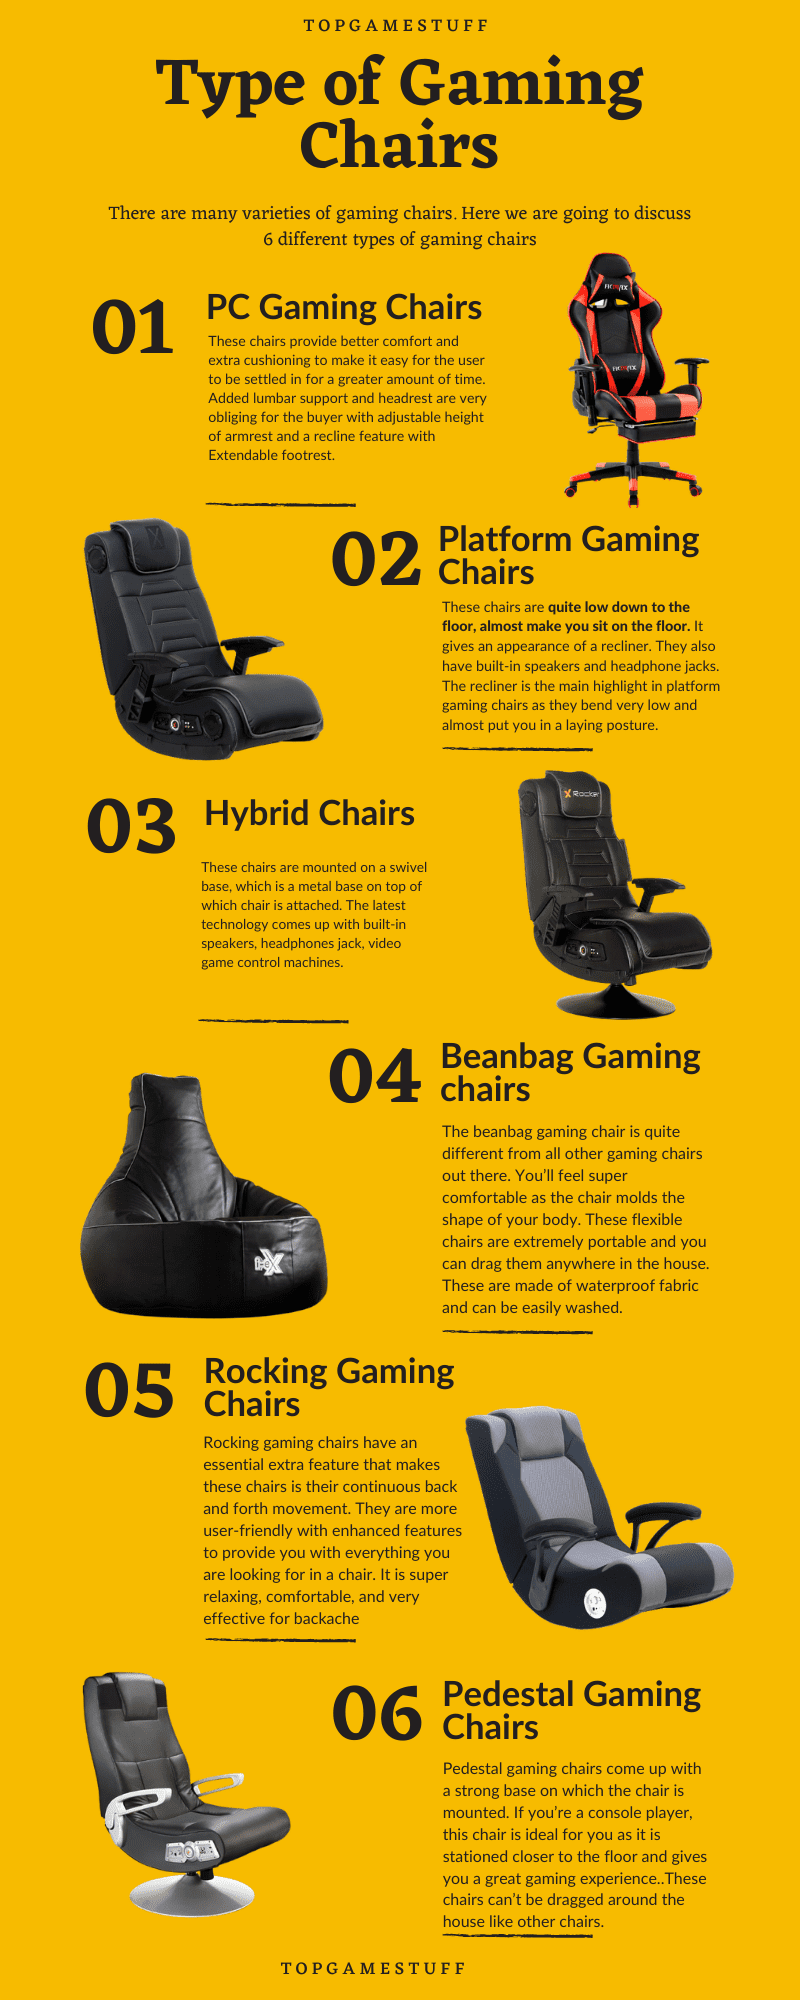 Types of gaming chairs